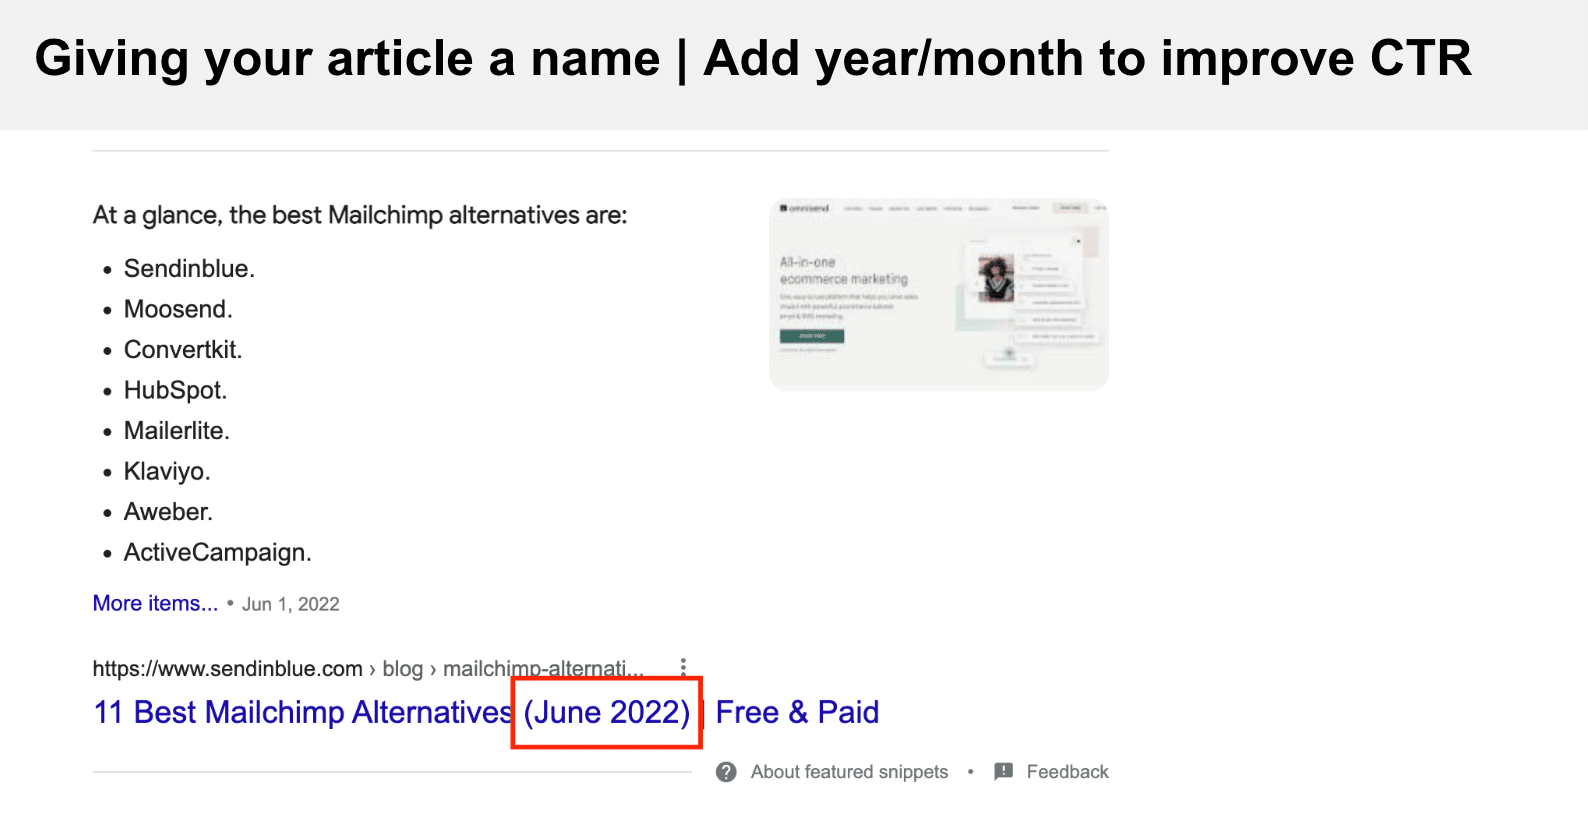 Giving article a name: Add year/month to improve CTR